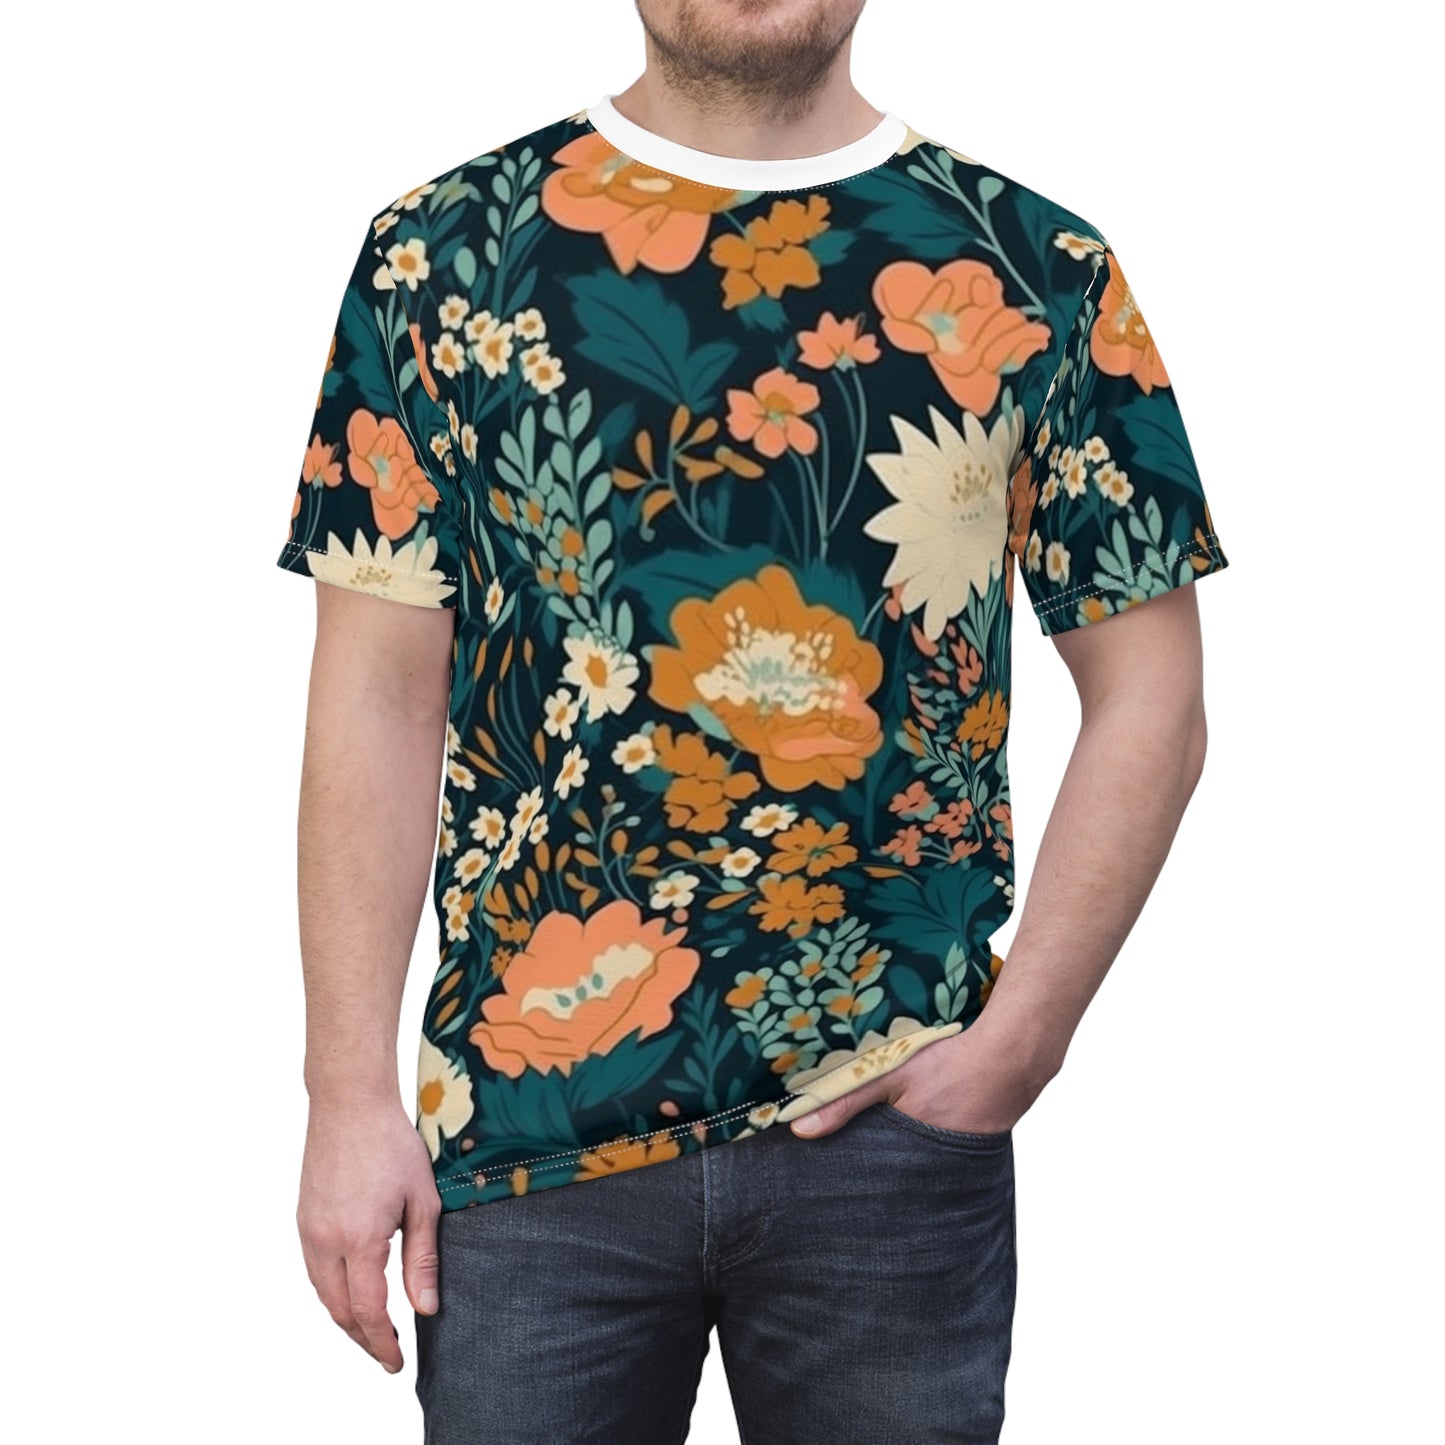 Floral Design, Abstract Style, Unisex Cut & Sew Tee